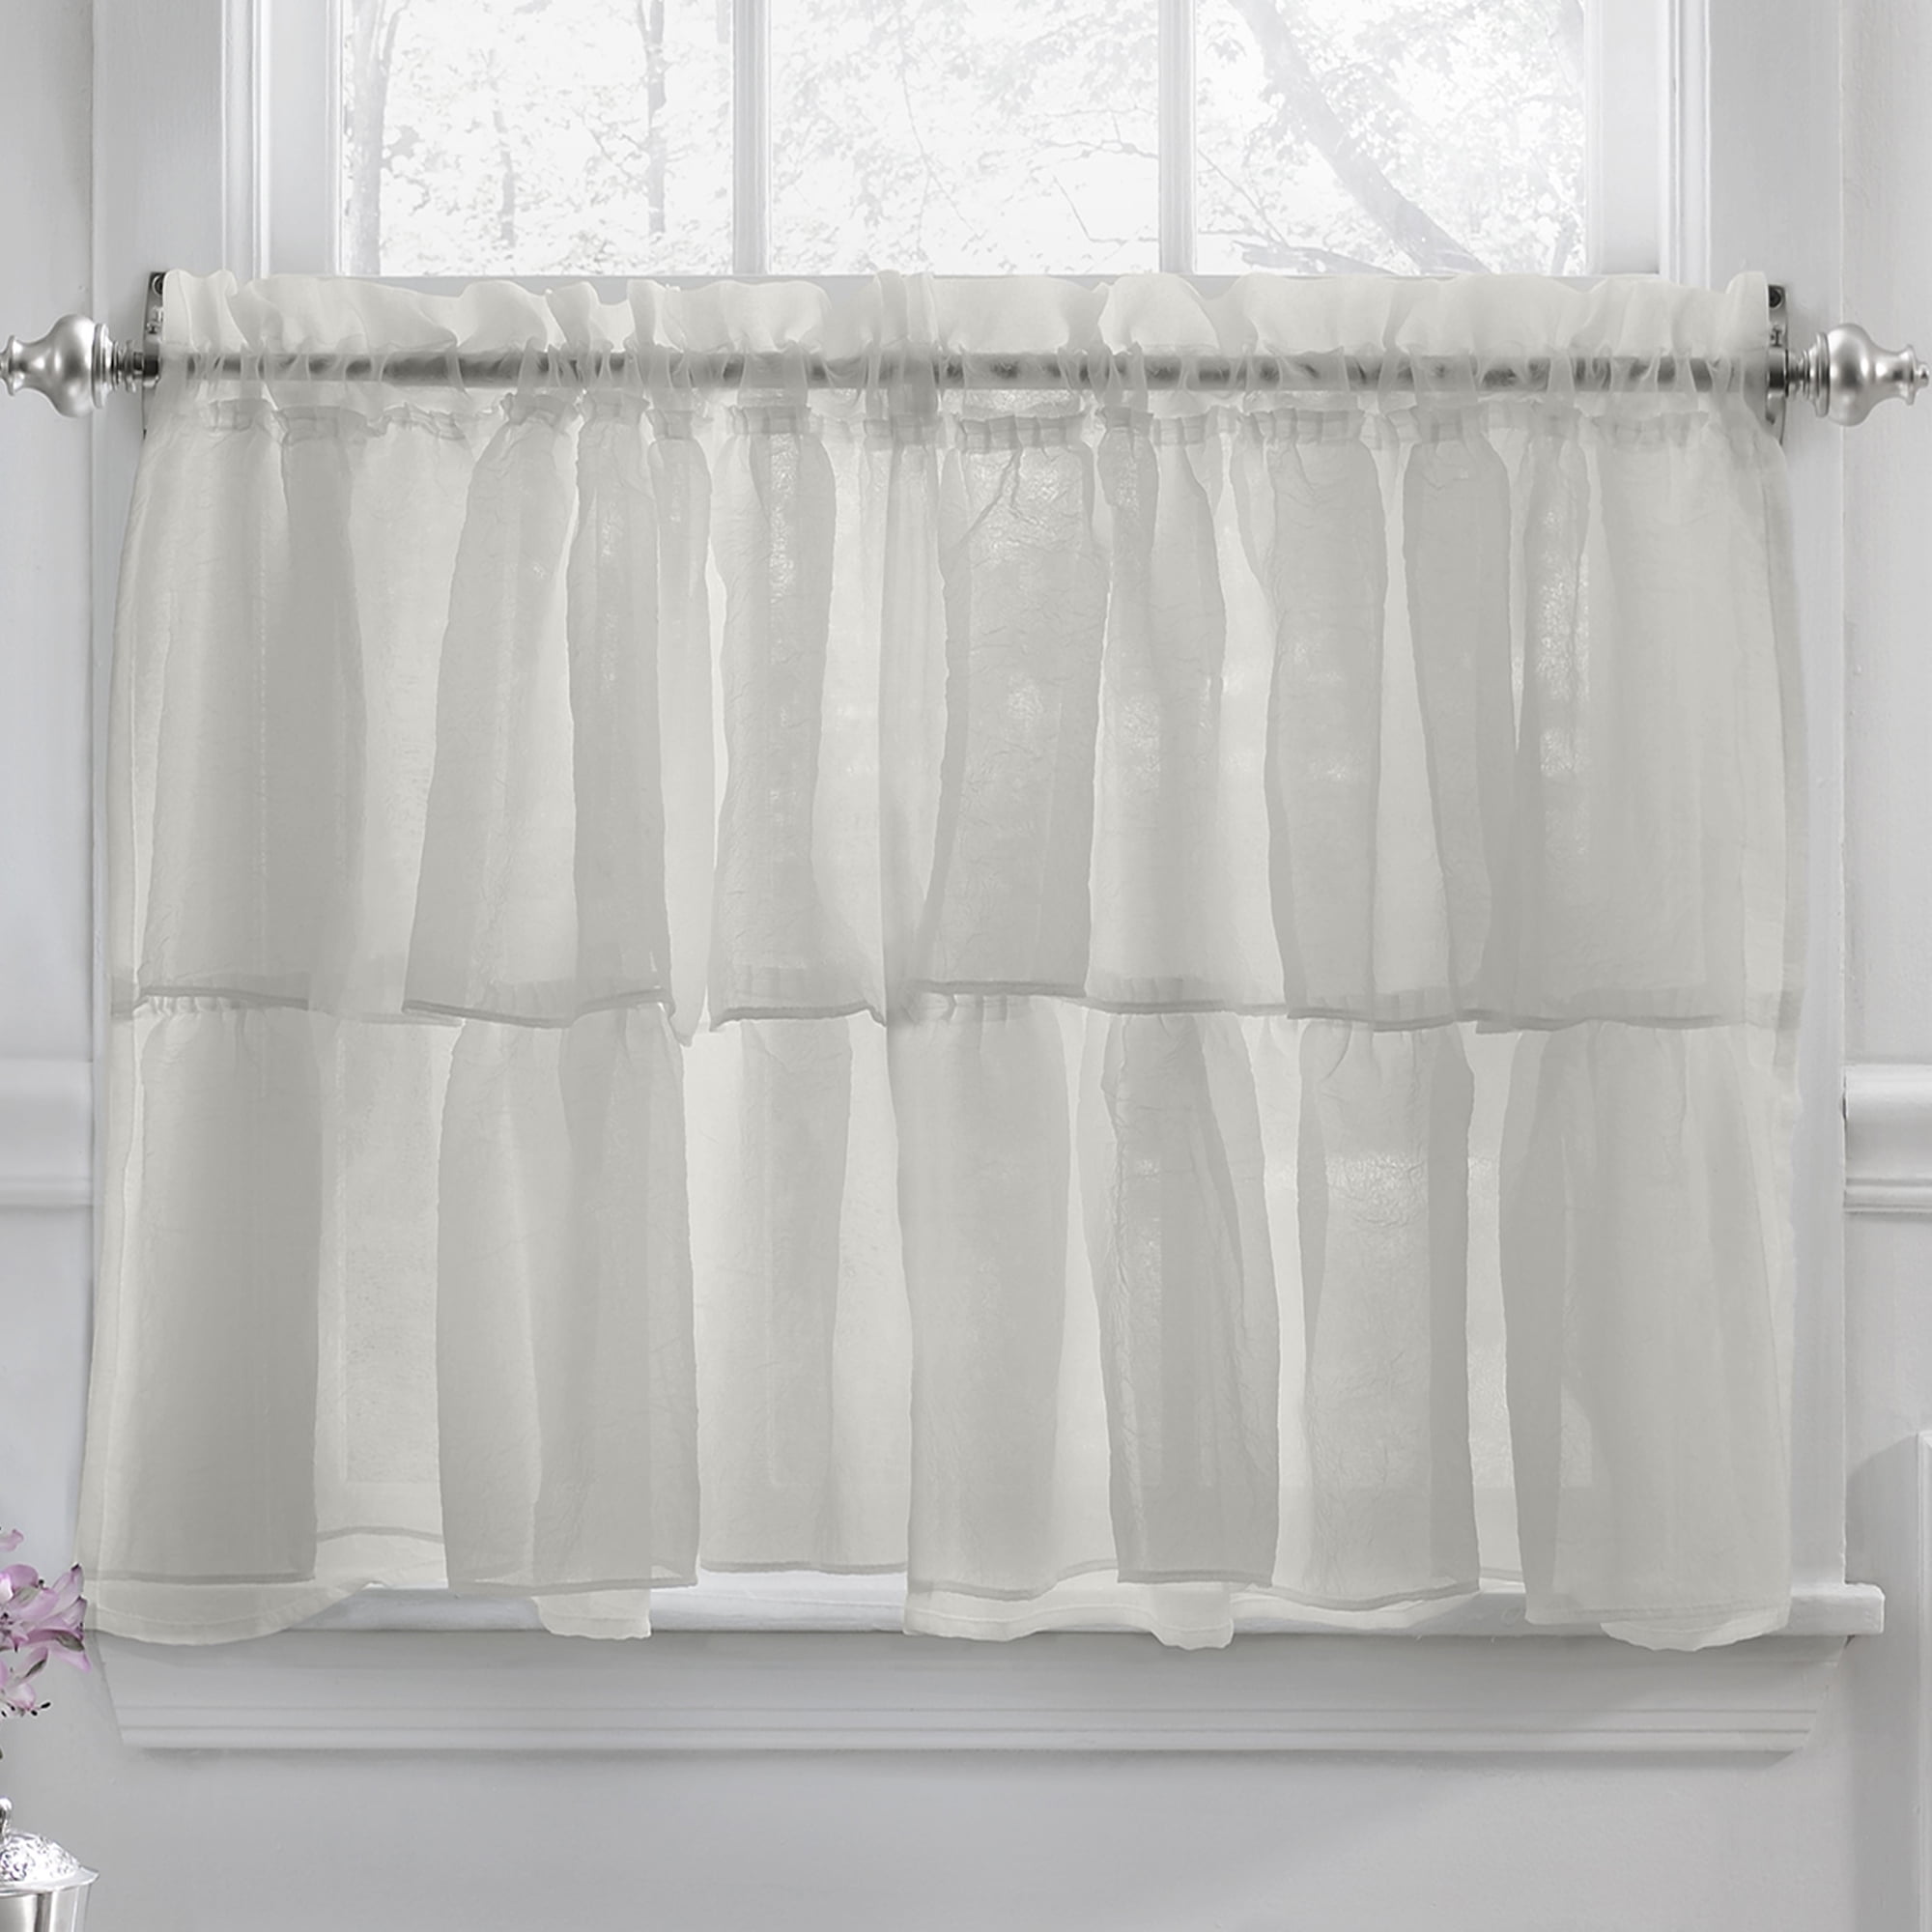 Gypsy Crushed Voile Ruffle Kitchen Window Curtain 24